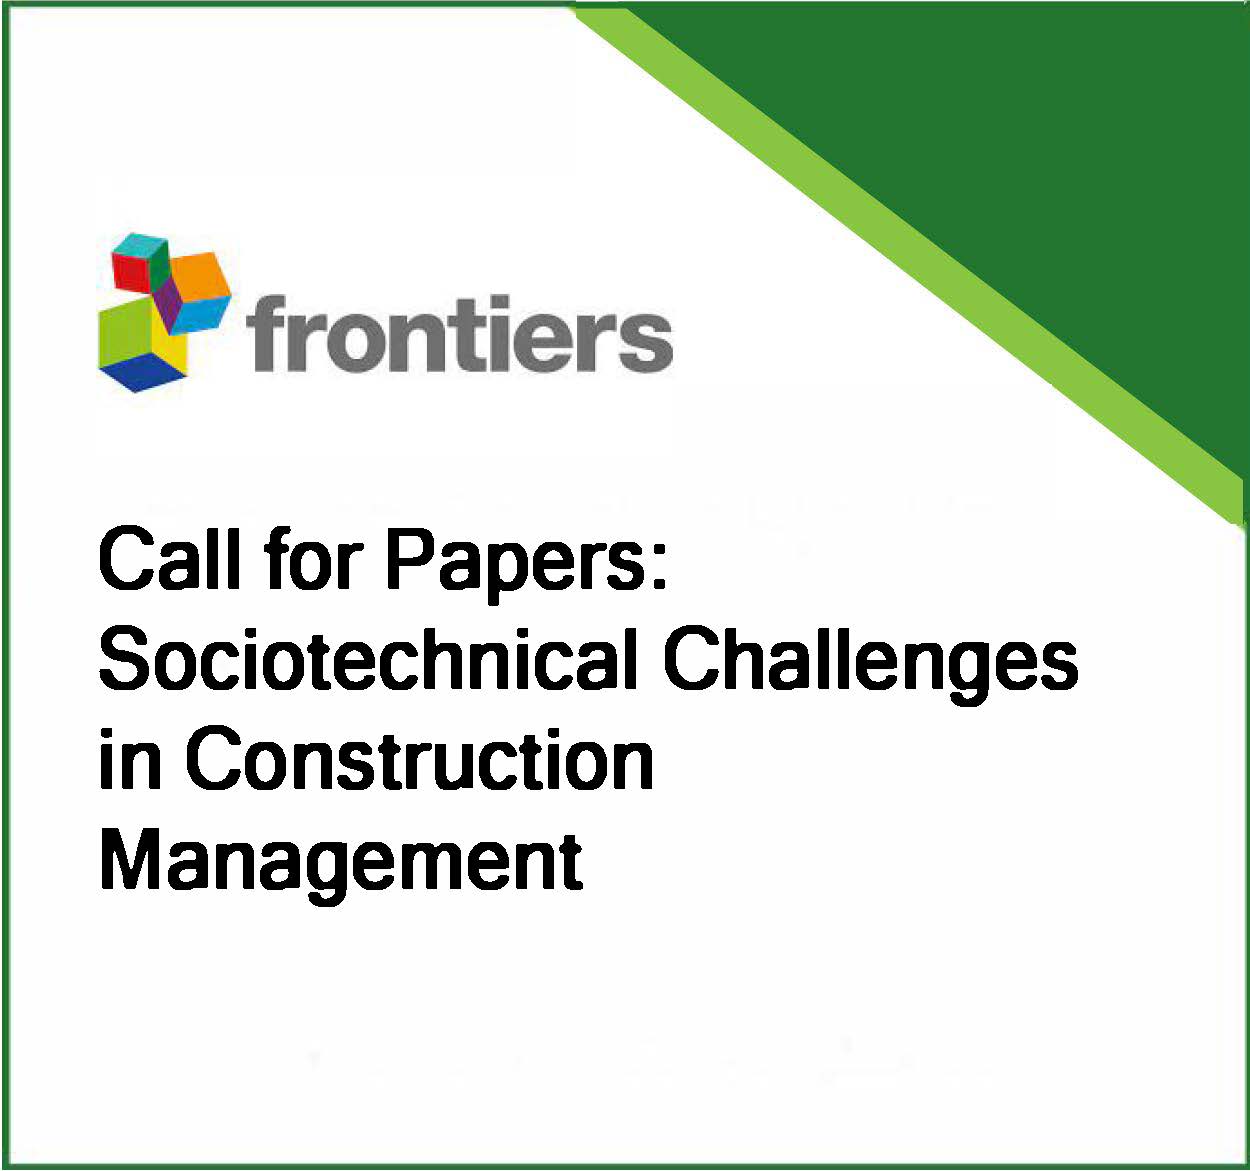 Call for Papers: Sociotechnical Challenges in Construction Management